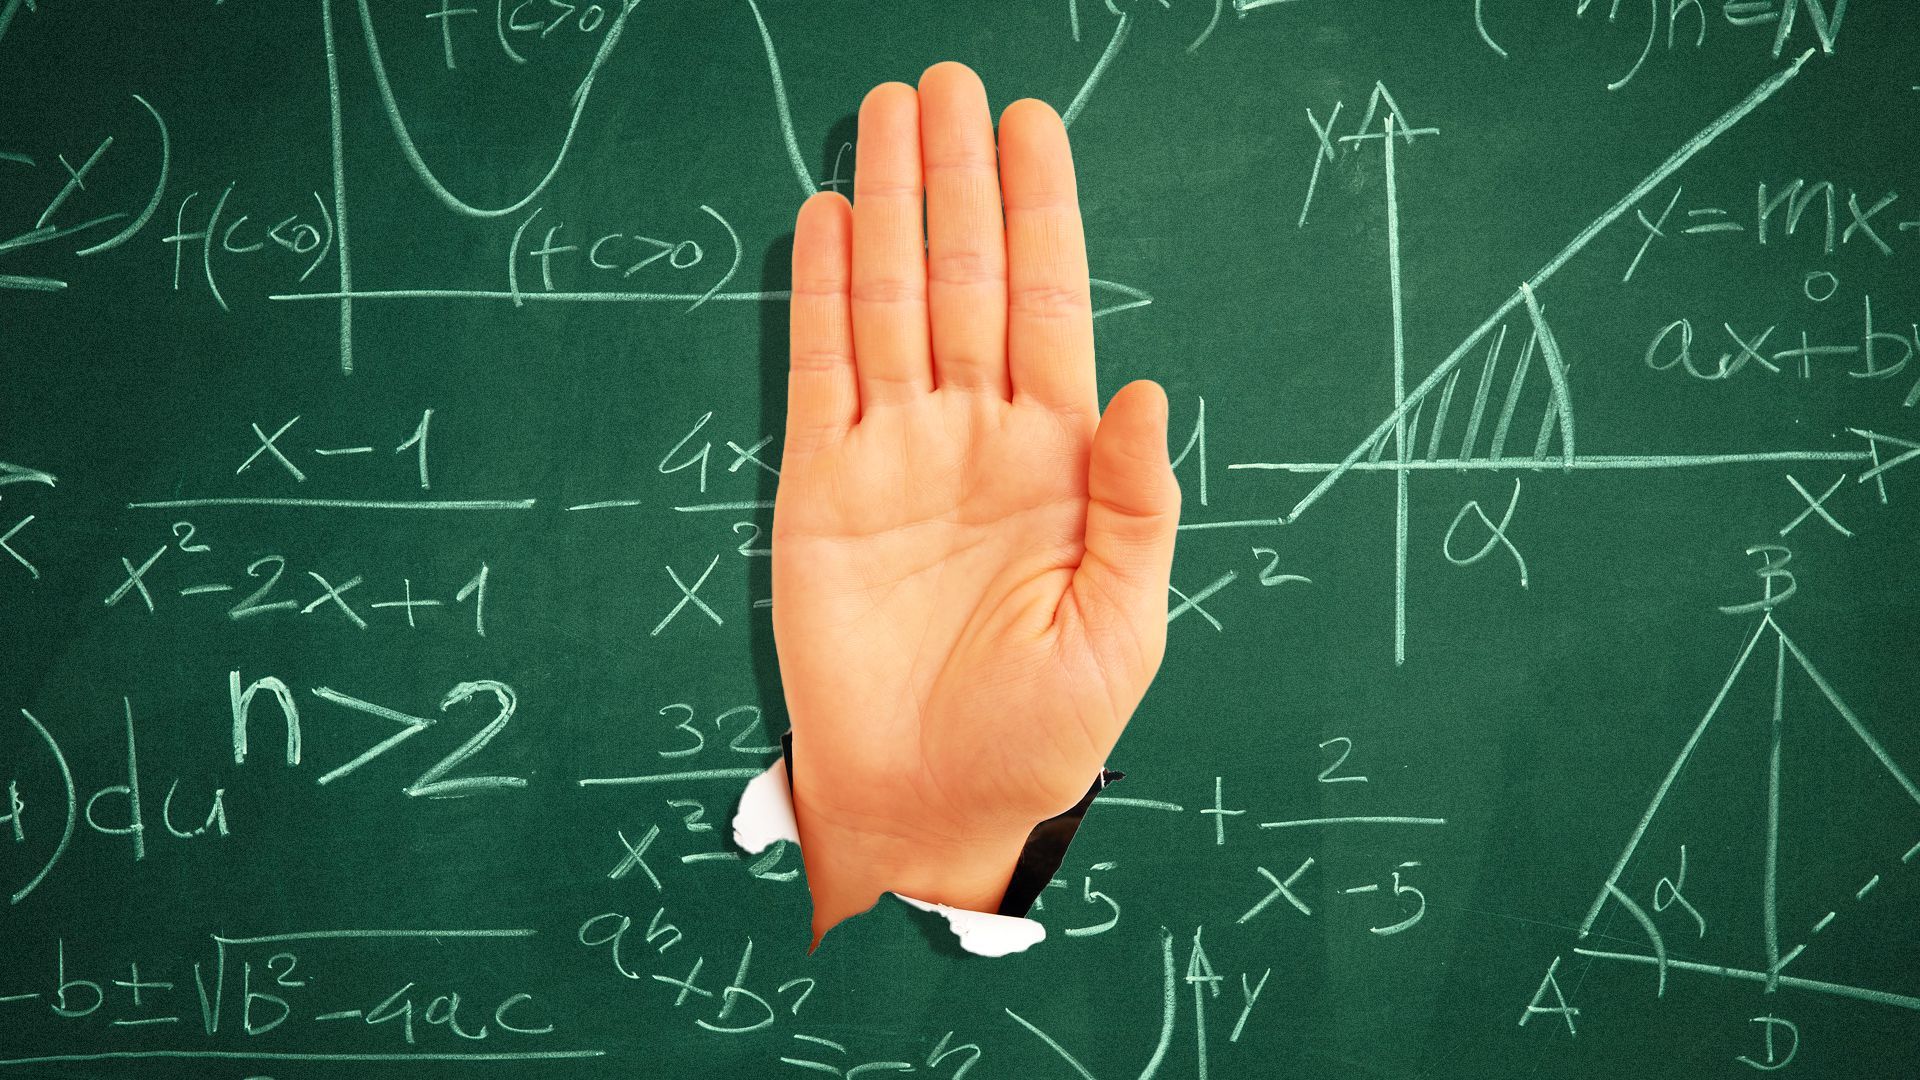 Illustration of a hand breaking through a blackboard making a "stop" motion 